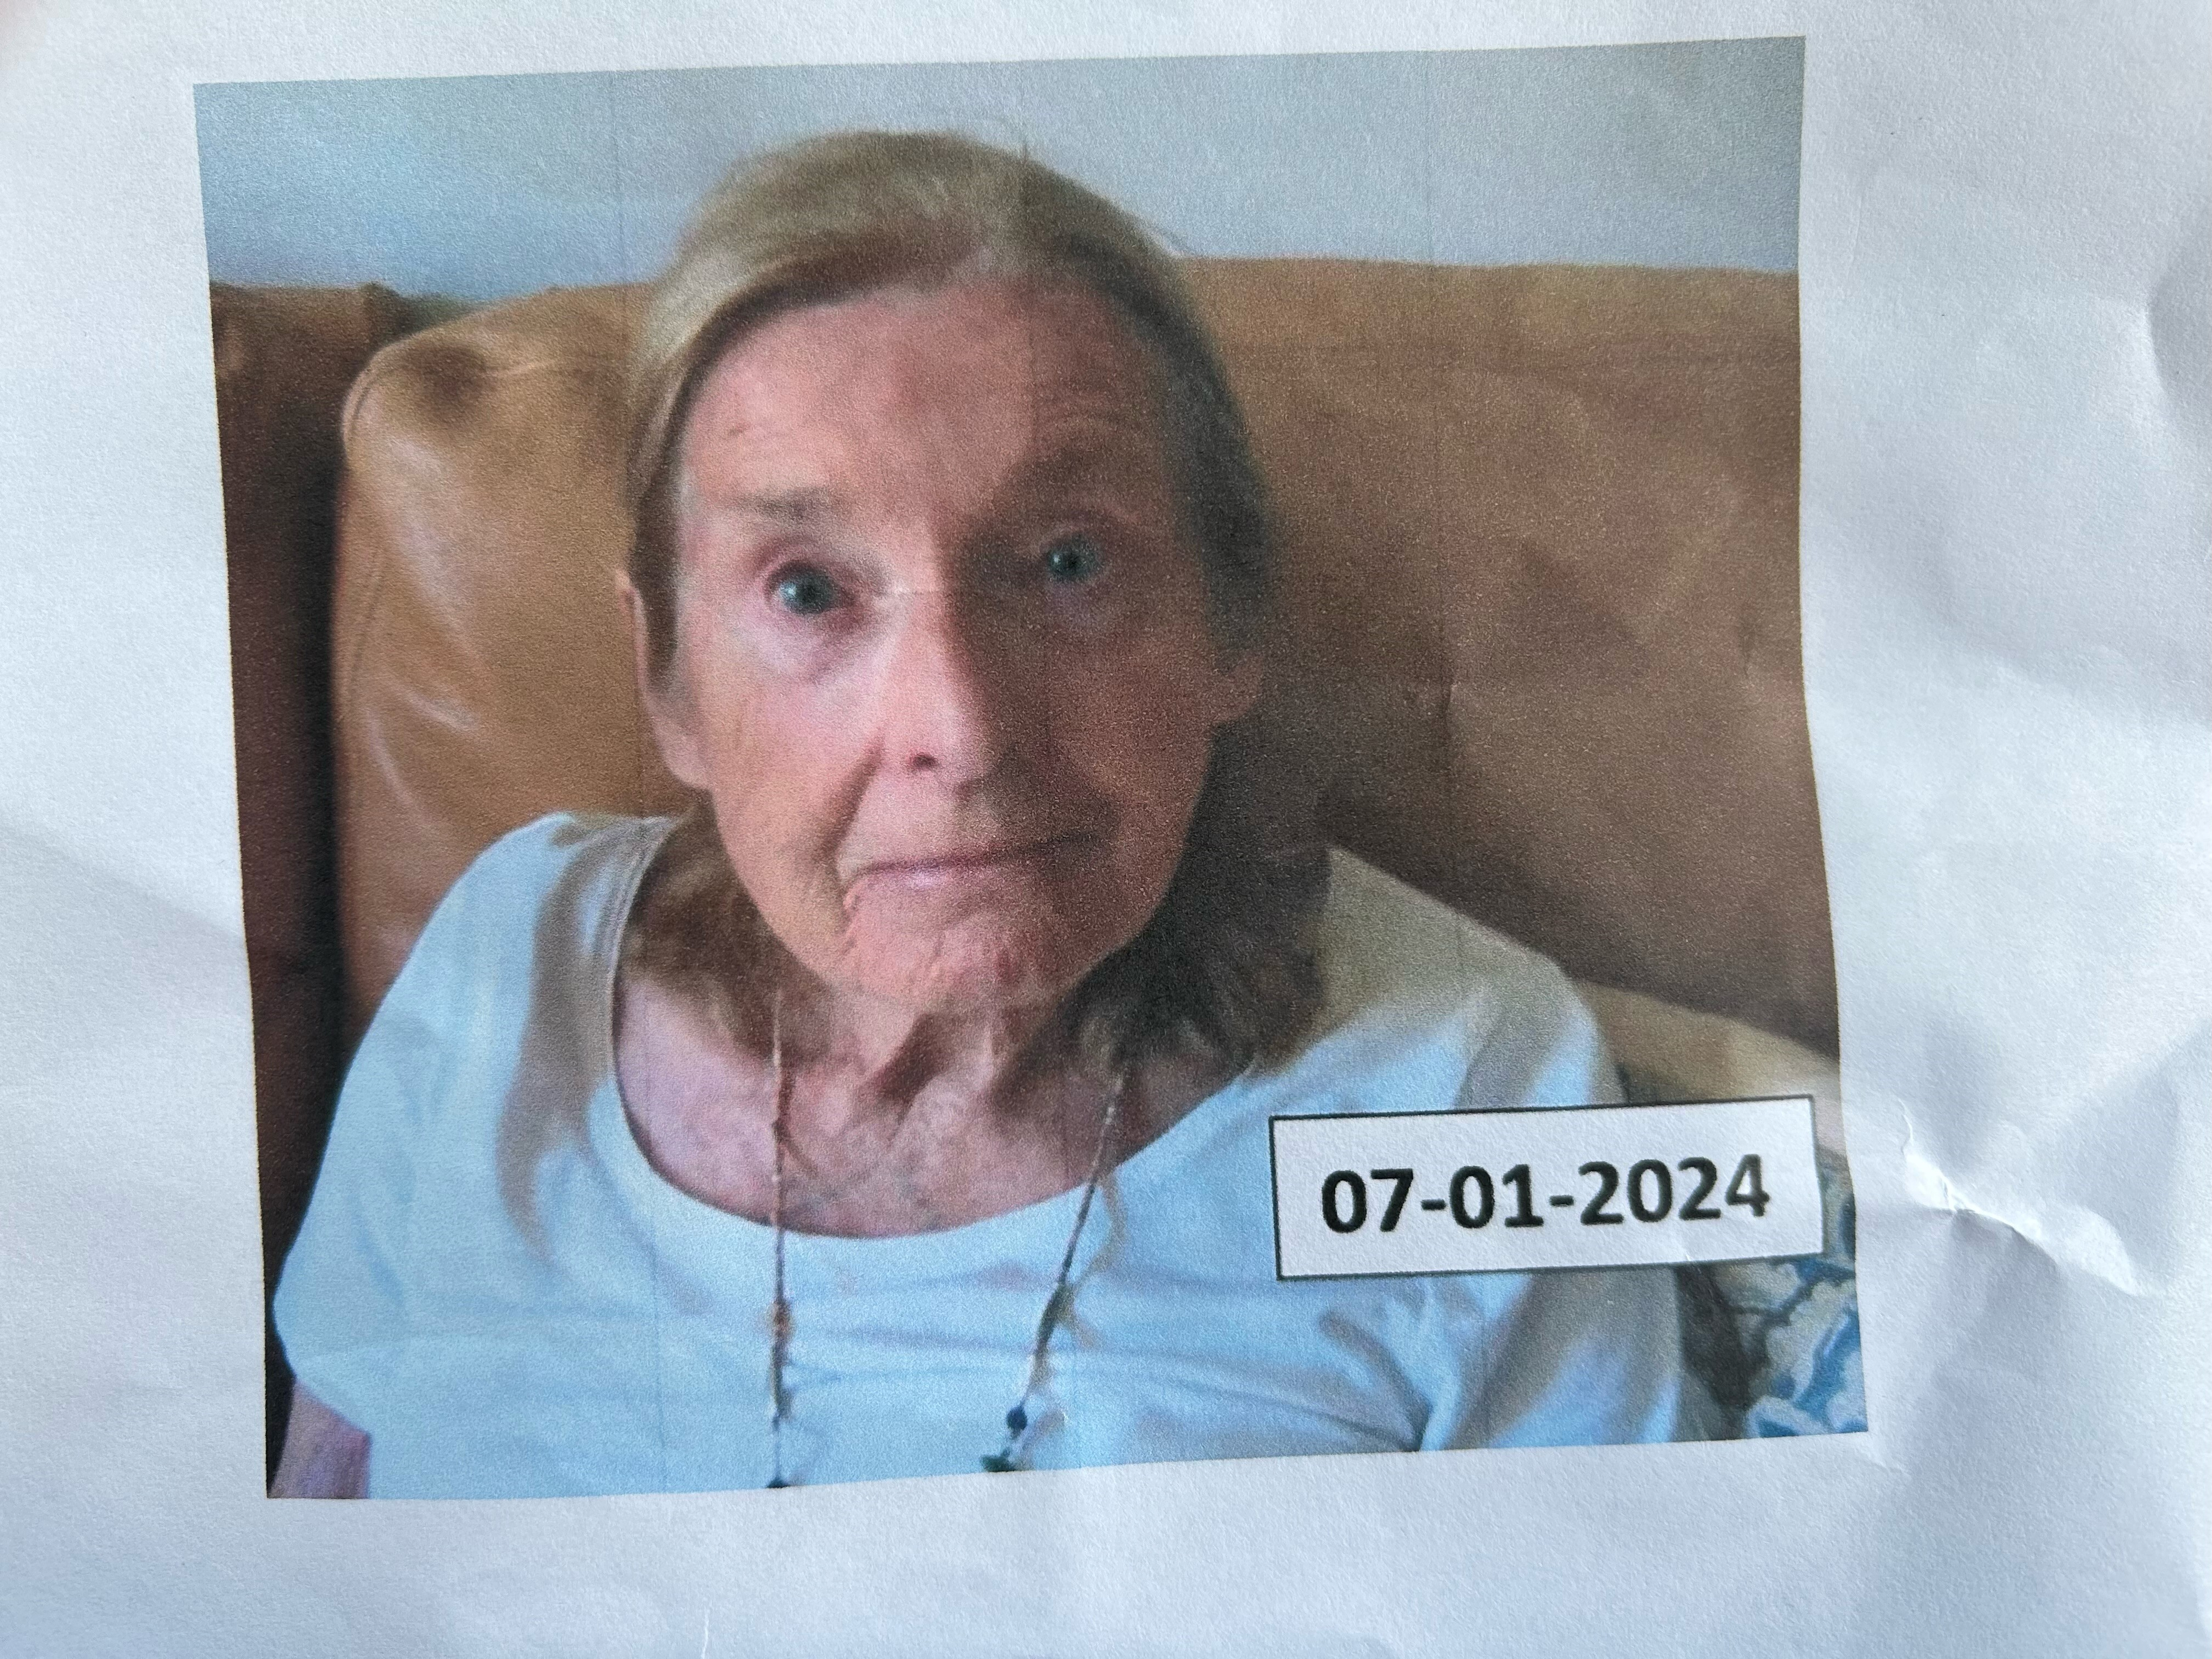 84-year-old Lower Merion woman who walked away from senior care community found dead